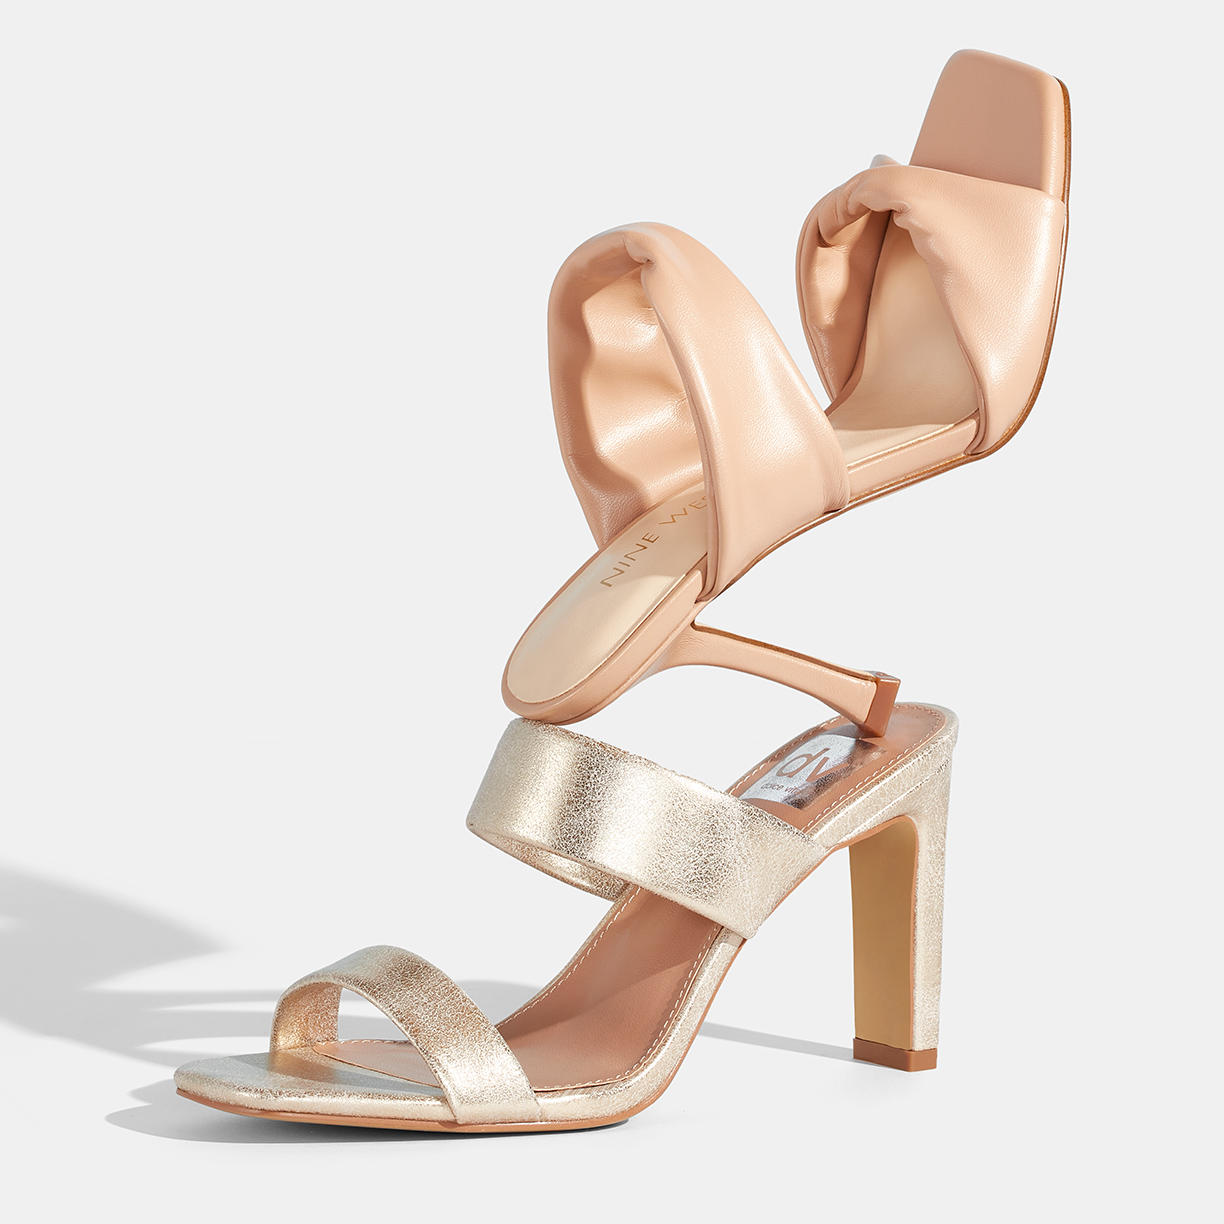 Heels Feat. Nine West Up to 60% Off